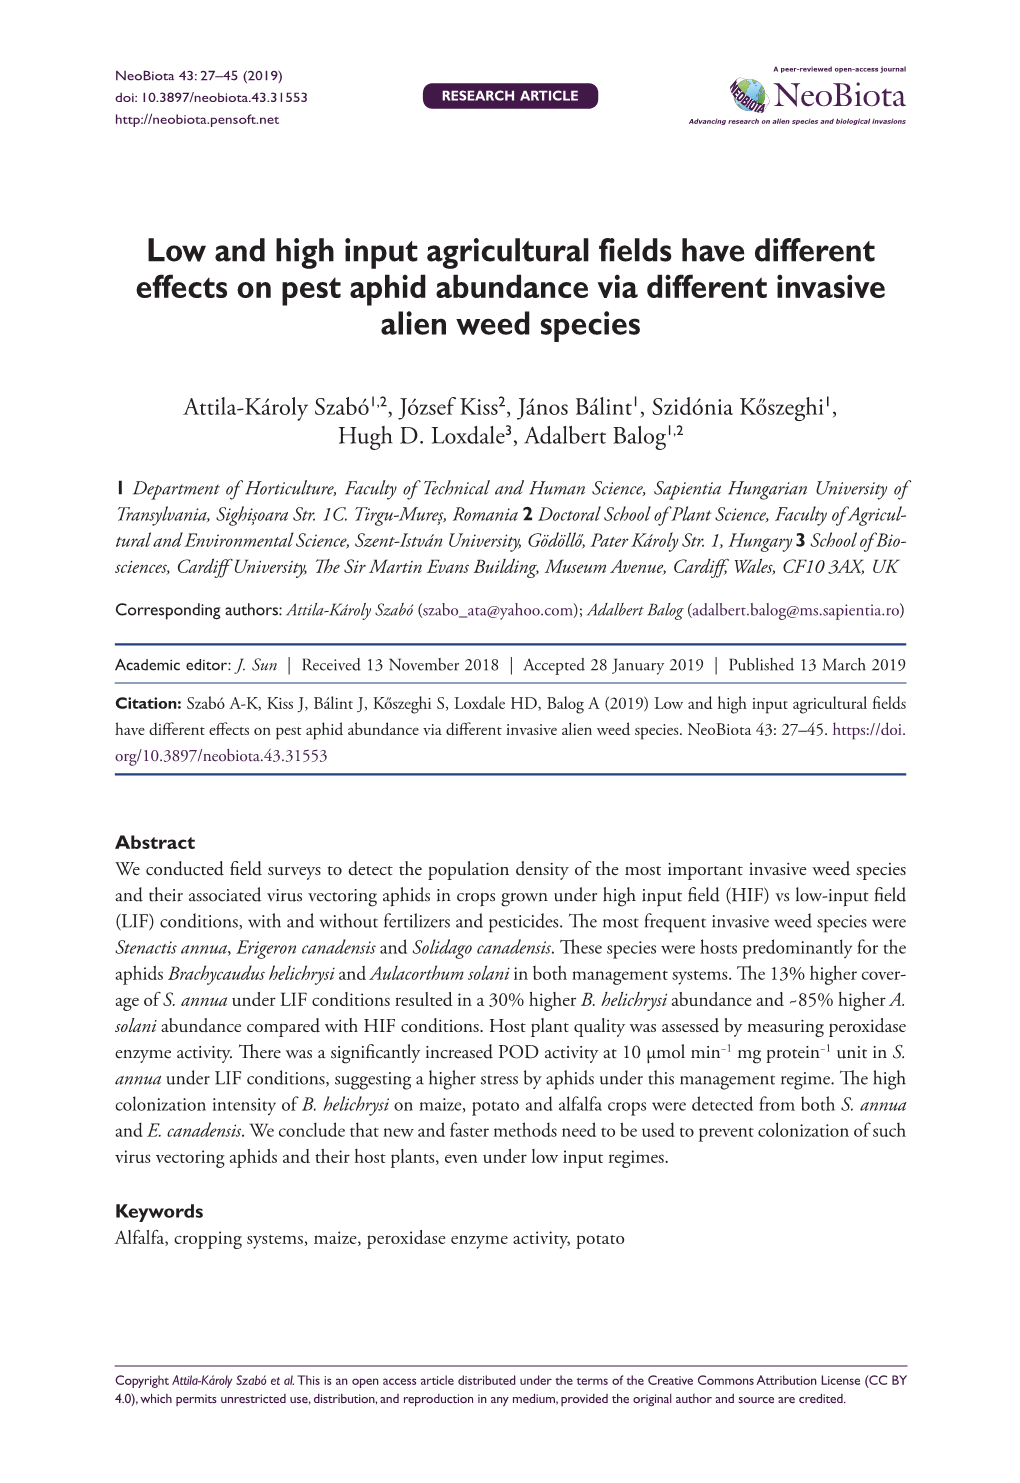 ﻿Low and High Input Agricultural Fields Have Different Effects on Pest Aphid